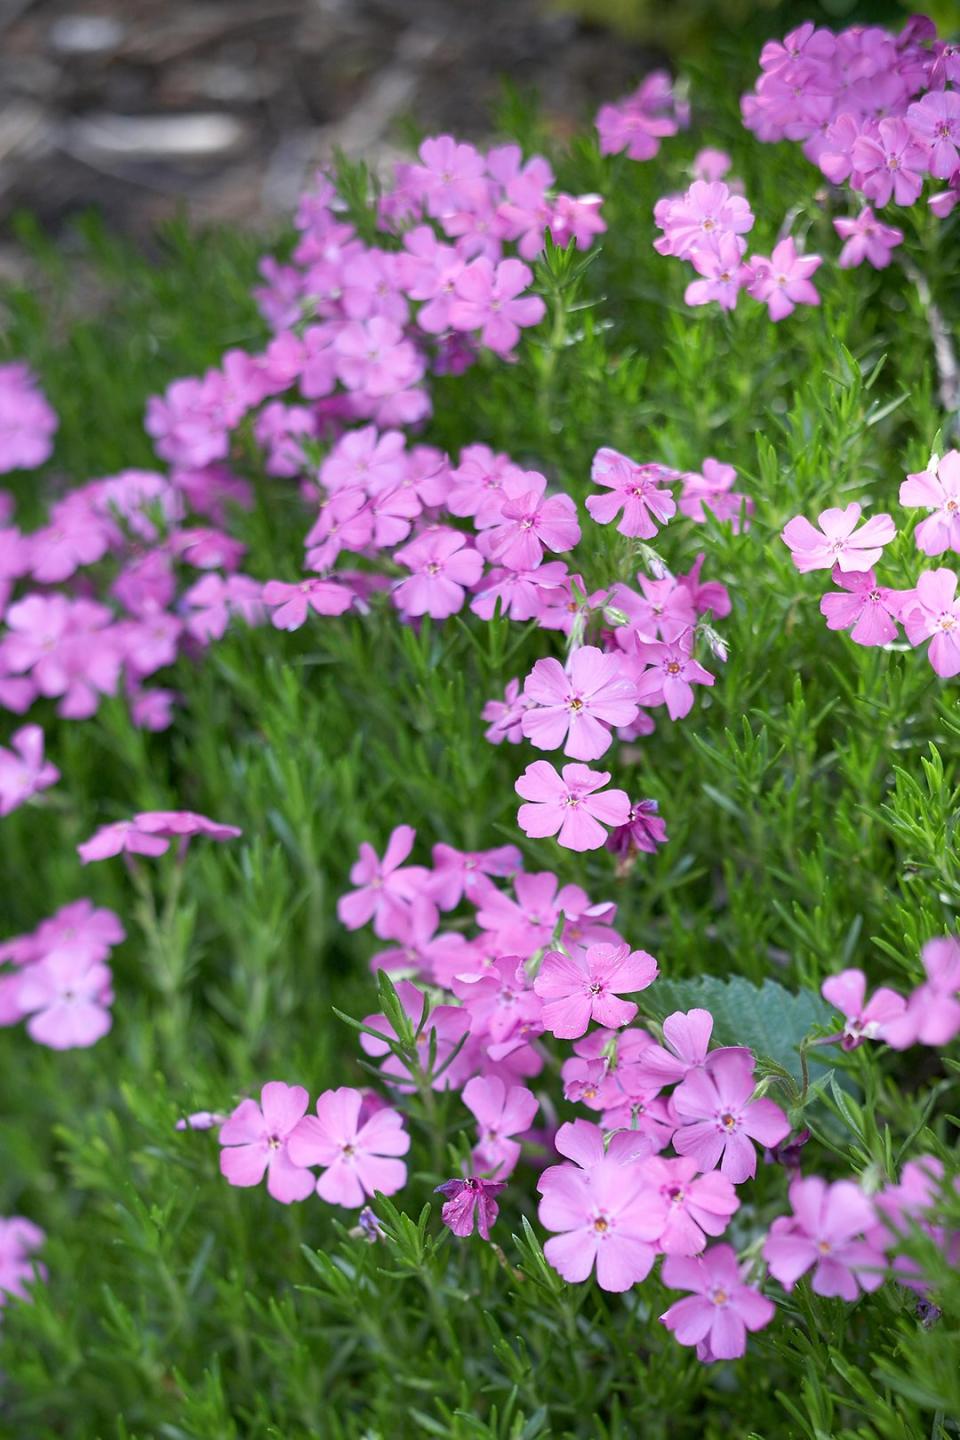 Add some flower power to your garden this year with any of these tough-as-nails perennial bloomers. No green thumb required!